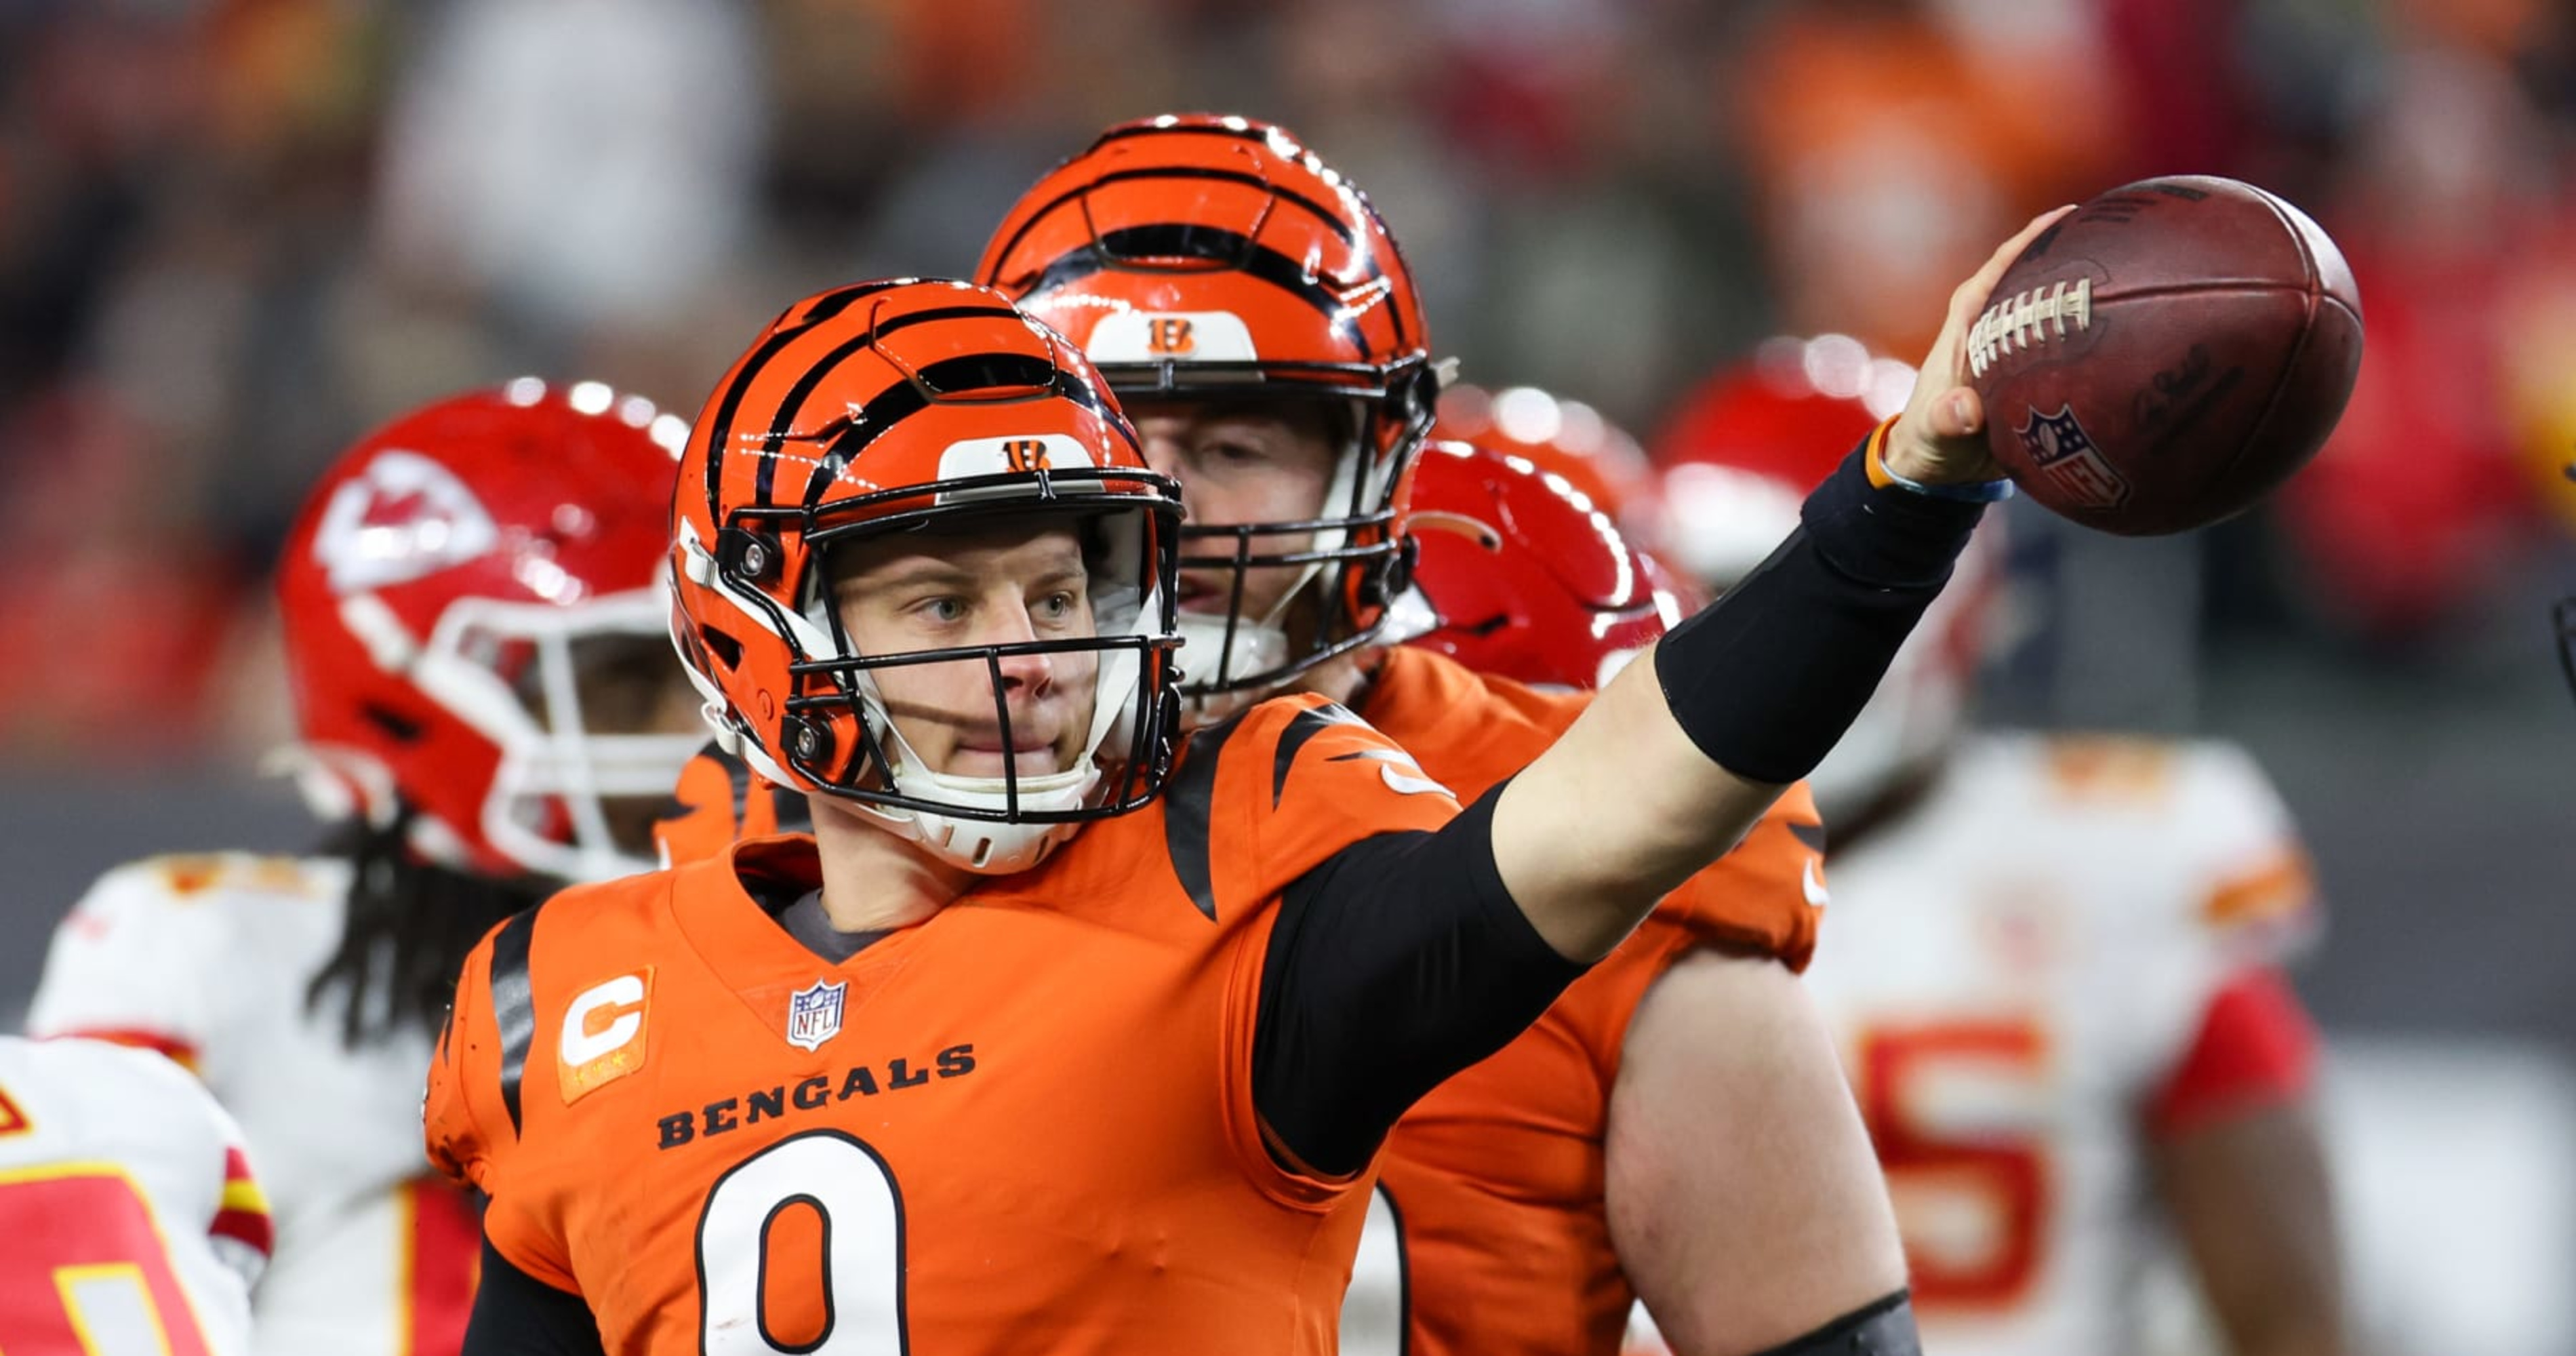 Bengals Finally Banish Super Bowl Hangover and Look Like Genuine